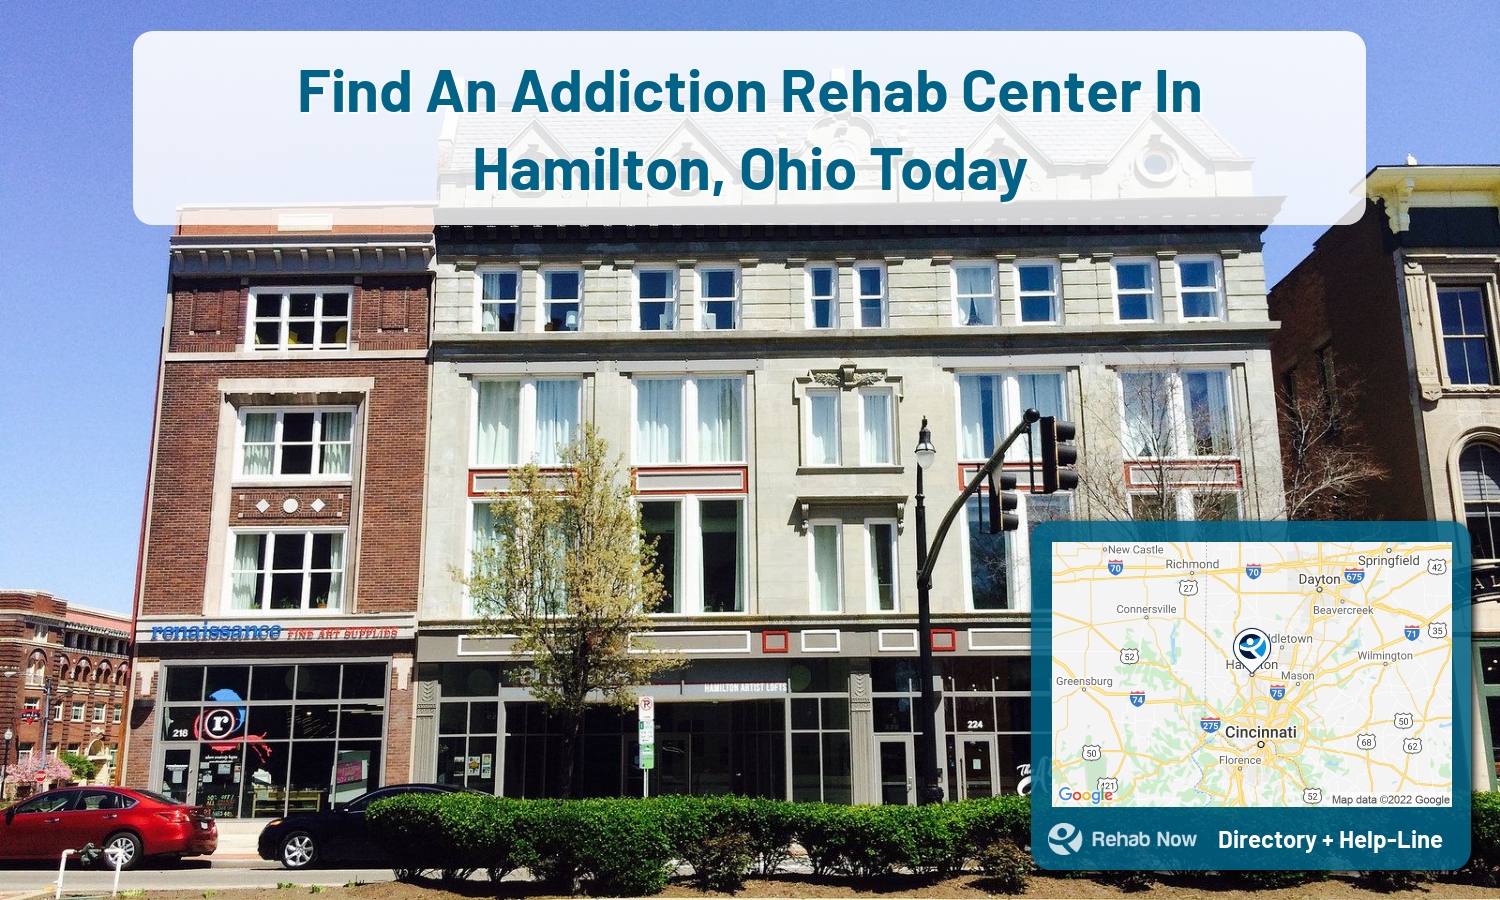 Hamilton, OH Treatment Centers. Find drug rehab in Hamilton, Ohio, or detox and treatment programs. Get the right help now!